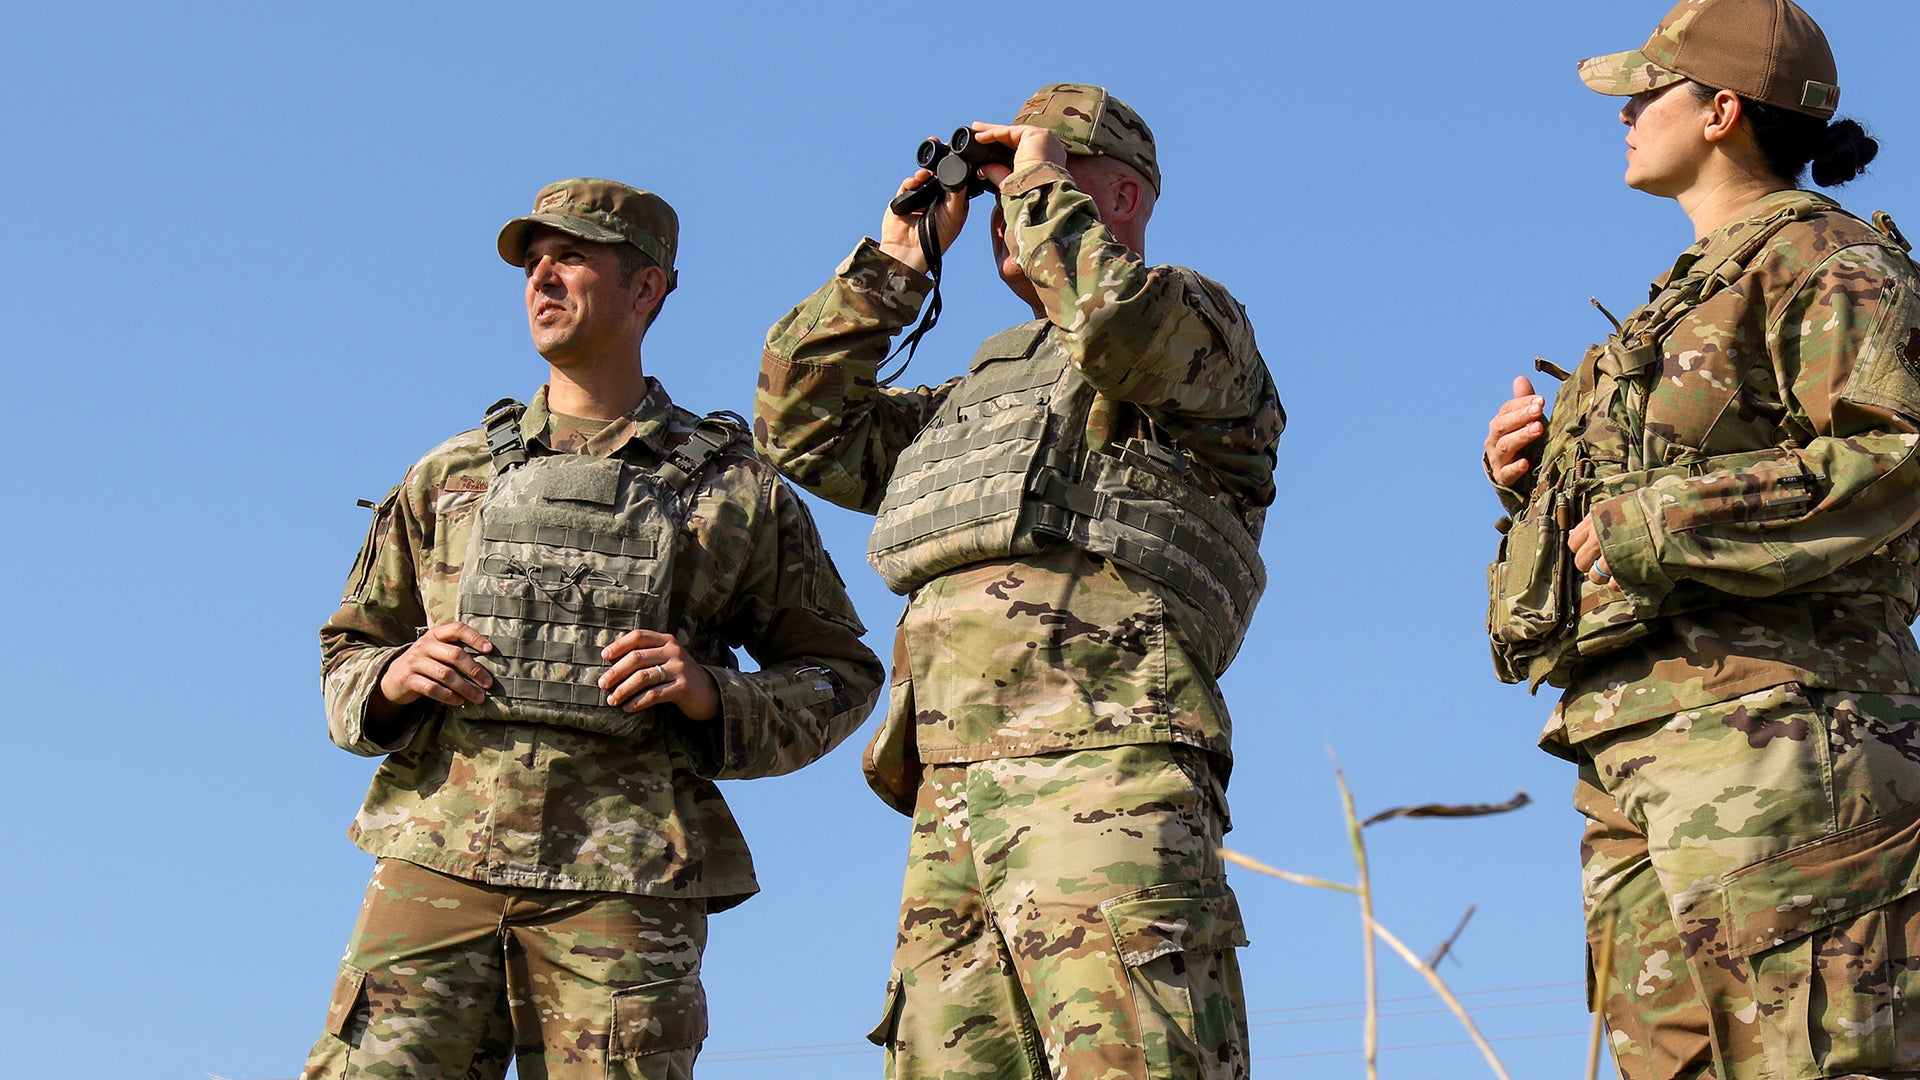 Col Andrew Camacho (left), 147th Attack Wing Commander, and Chief Master Sgt. (right), 147th Attack Wing Command Chief, look across the Texas-Mexico border in the Rio Grande Valley area of south Texas, February 22, 2022. The Wing leaders visited with members of the 147th Attack Wing deployed to the border for Operation Lone Star.